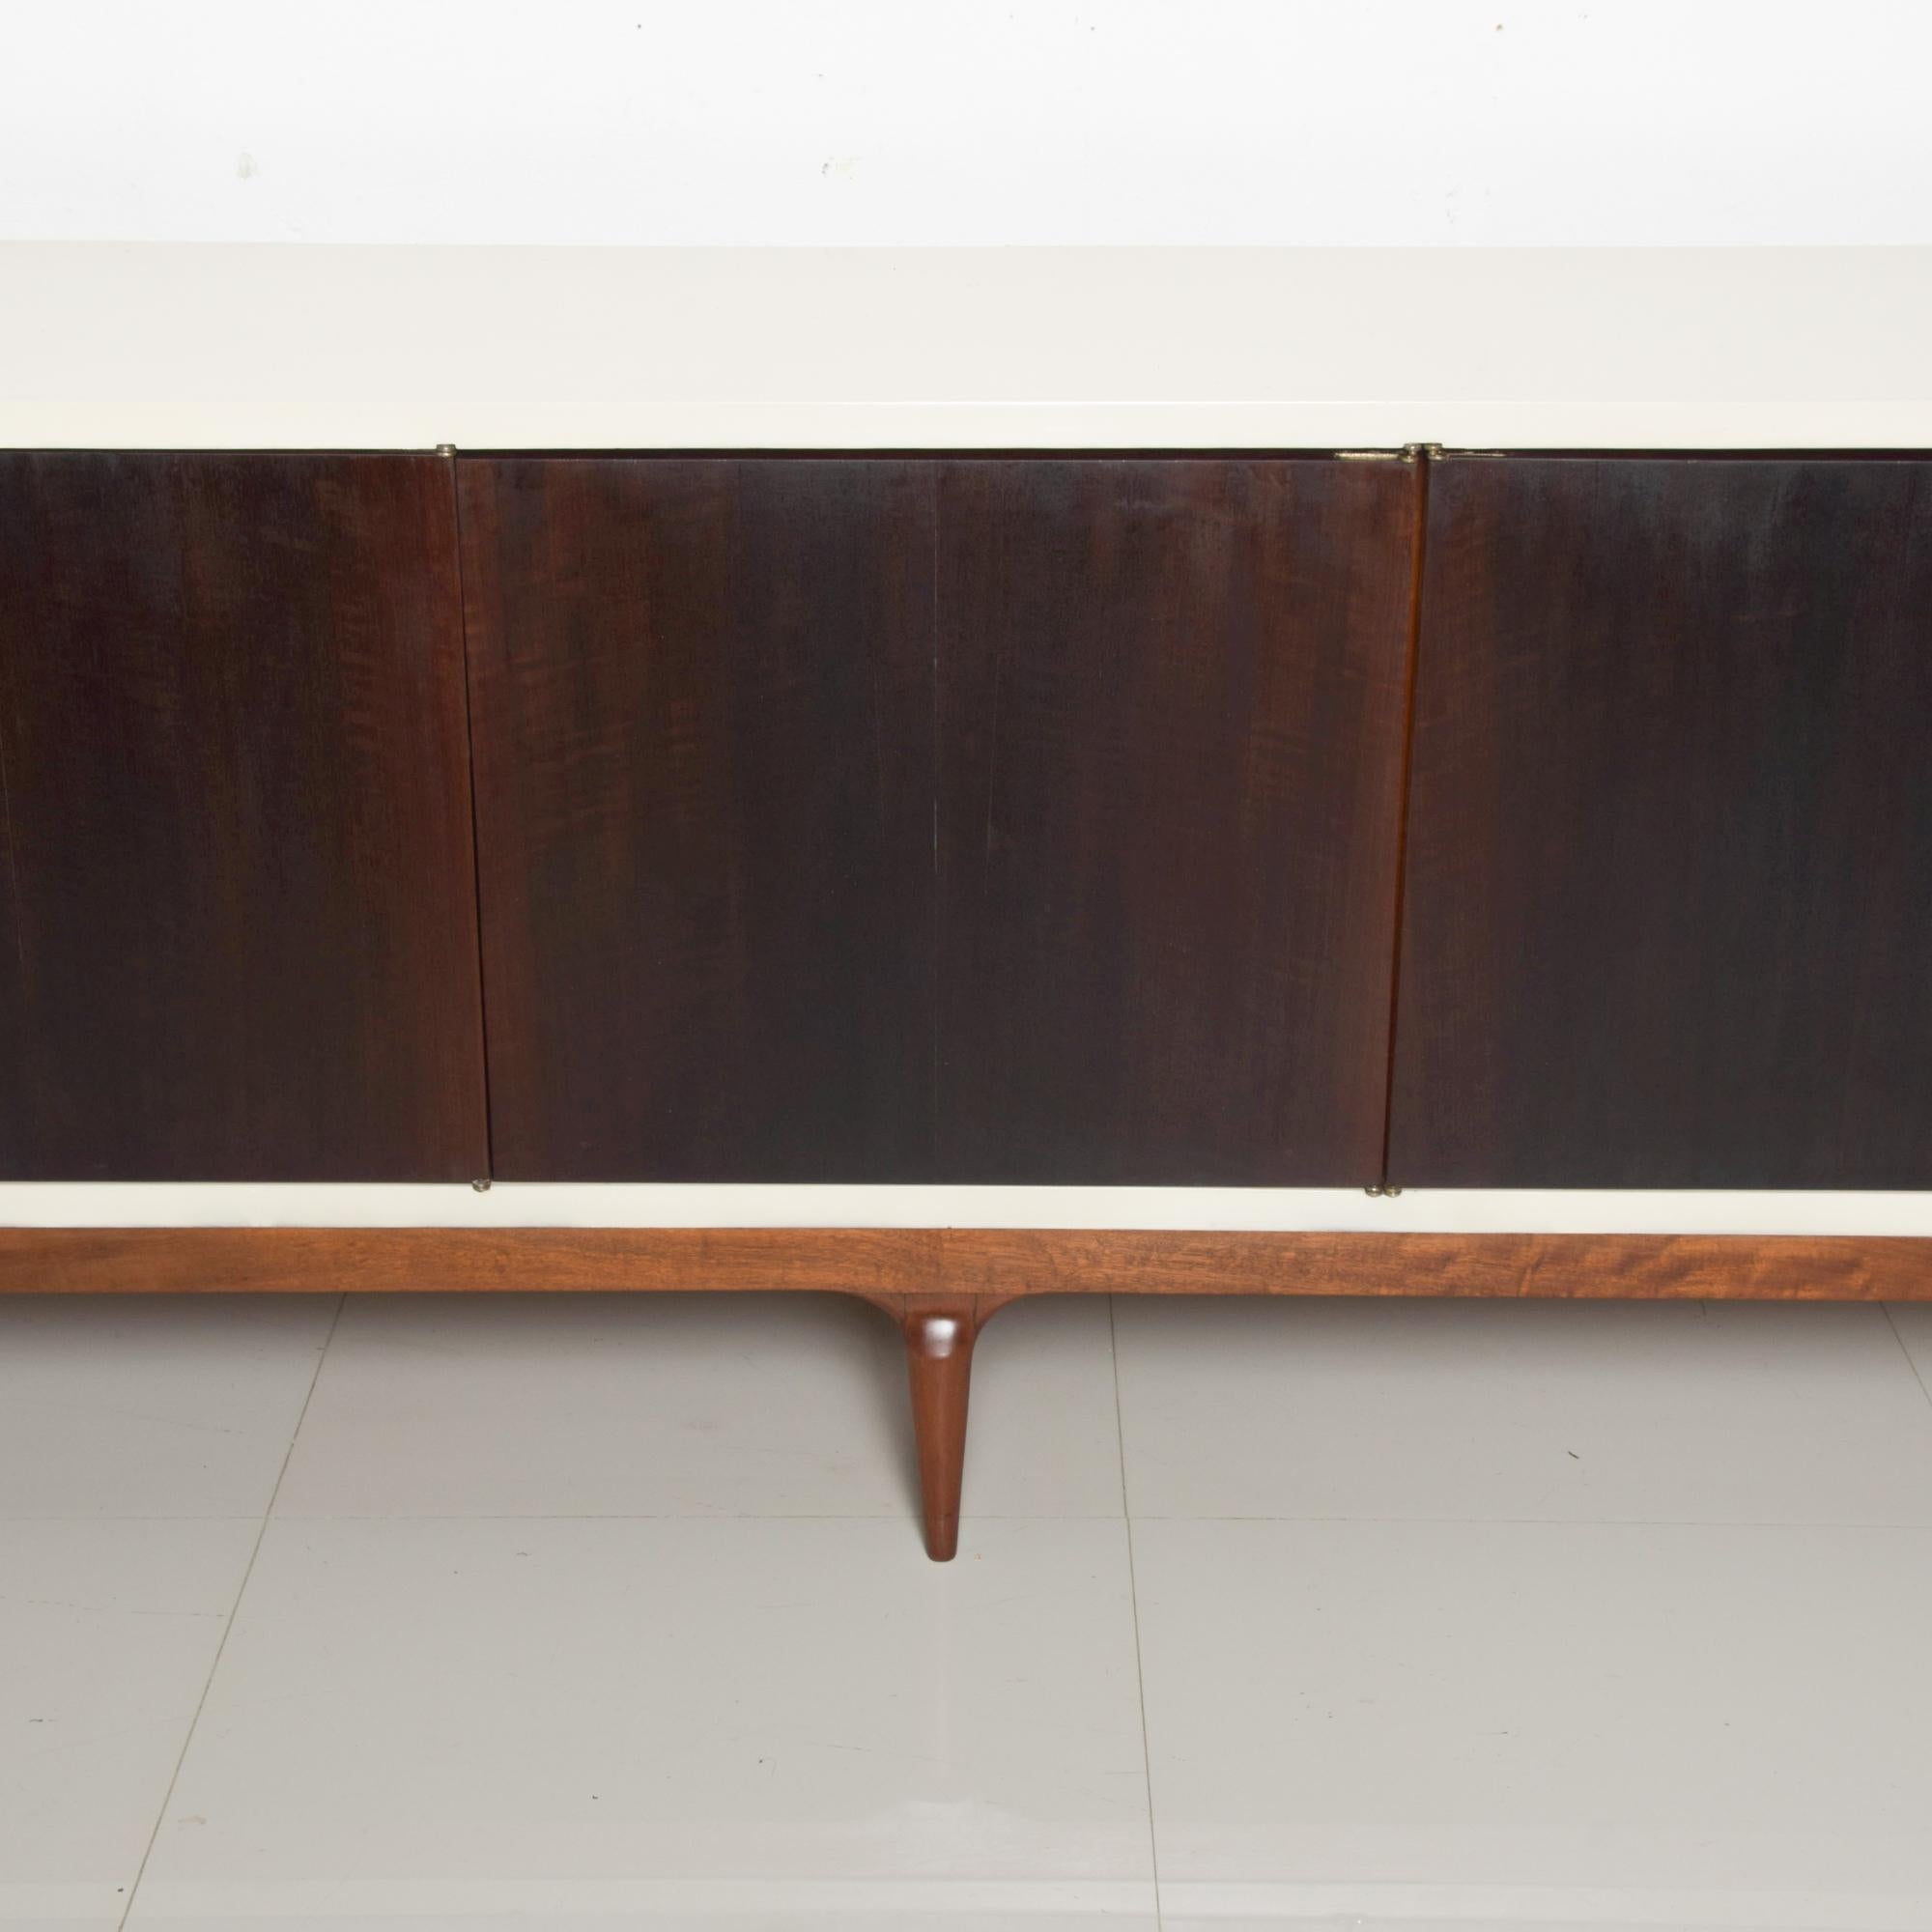 Spectacularly sleek clean modern line credenza made in Monterrey, Mexico, circa early 1960s.
Lean long leggy credenza two tone lacquer & wood
Restored by Ambianic with lacquered top in an off-white with gold leaf accent.
Five doors finished with